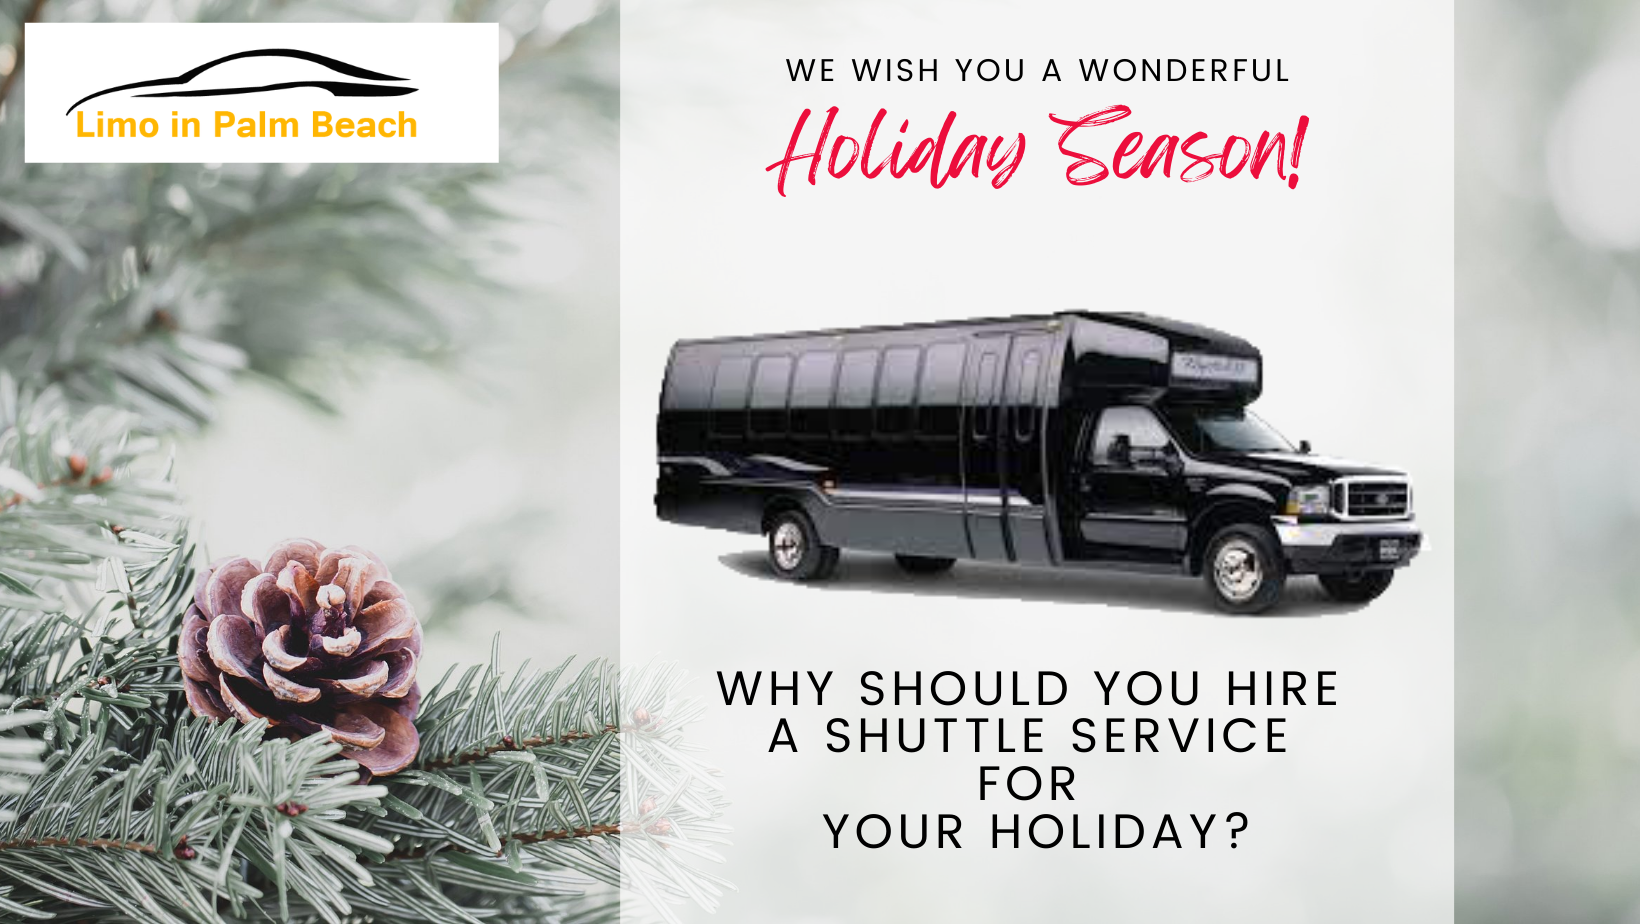 Why Should You Hire a Shuttle Service for Your Holiday?